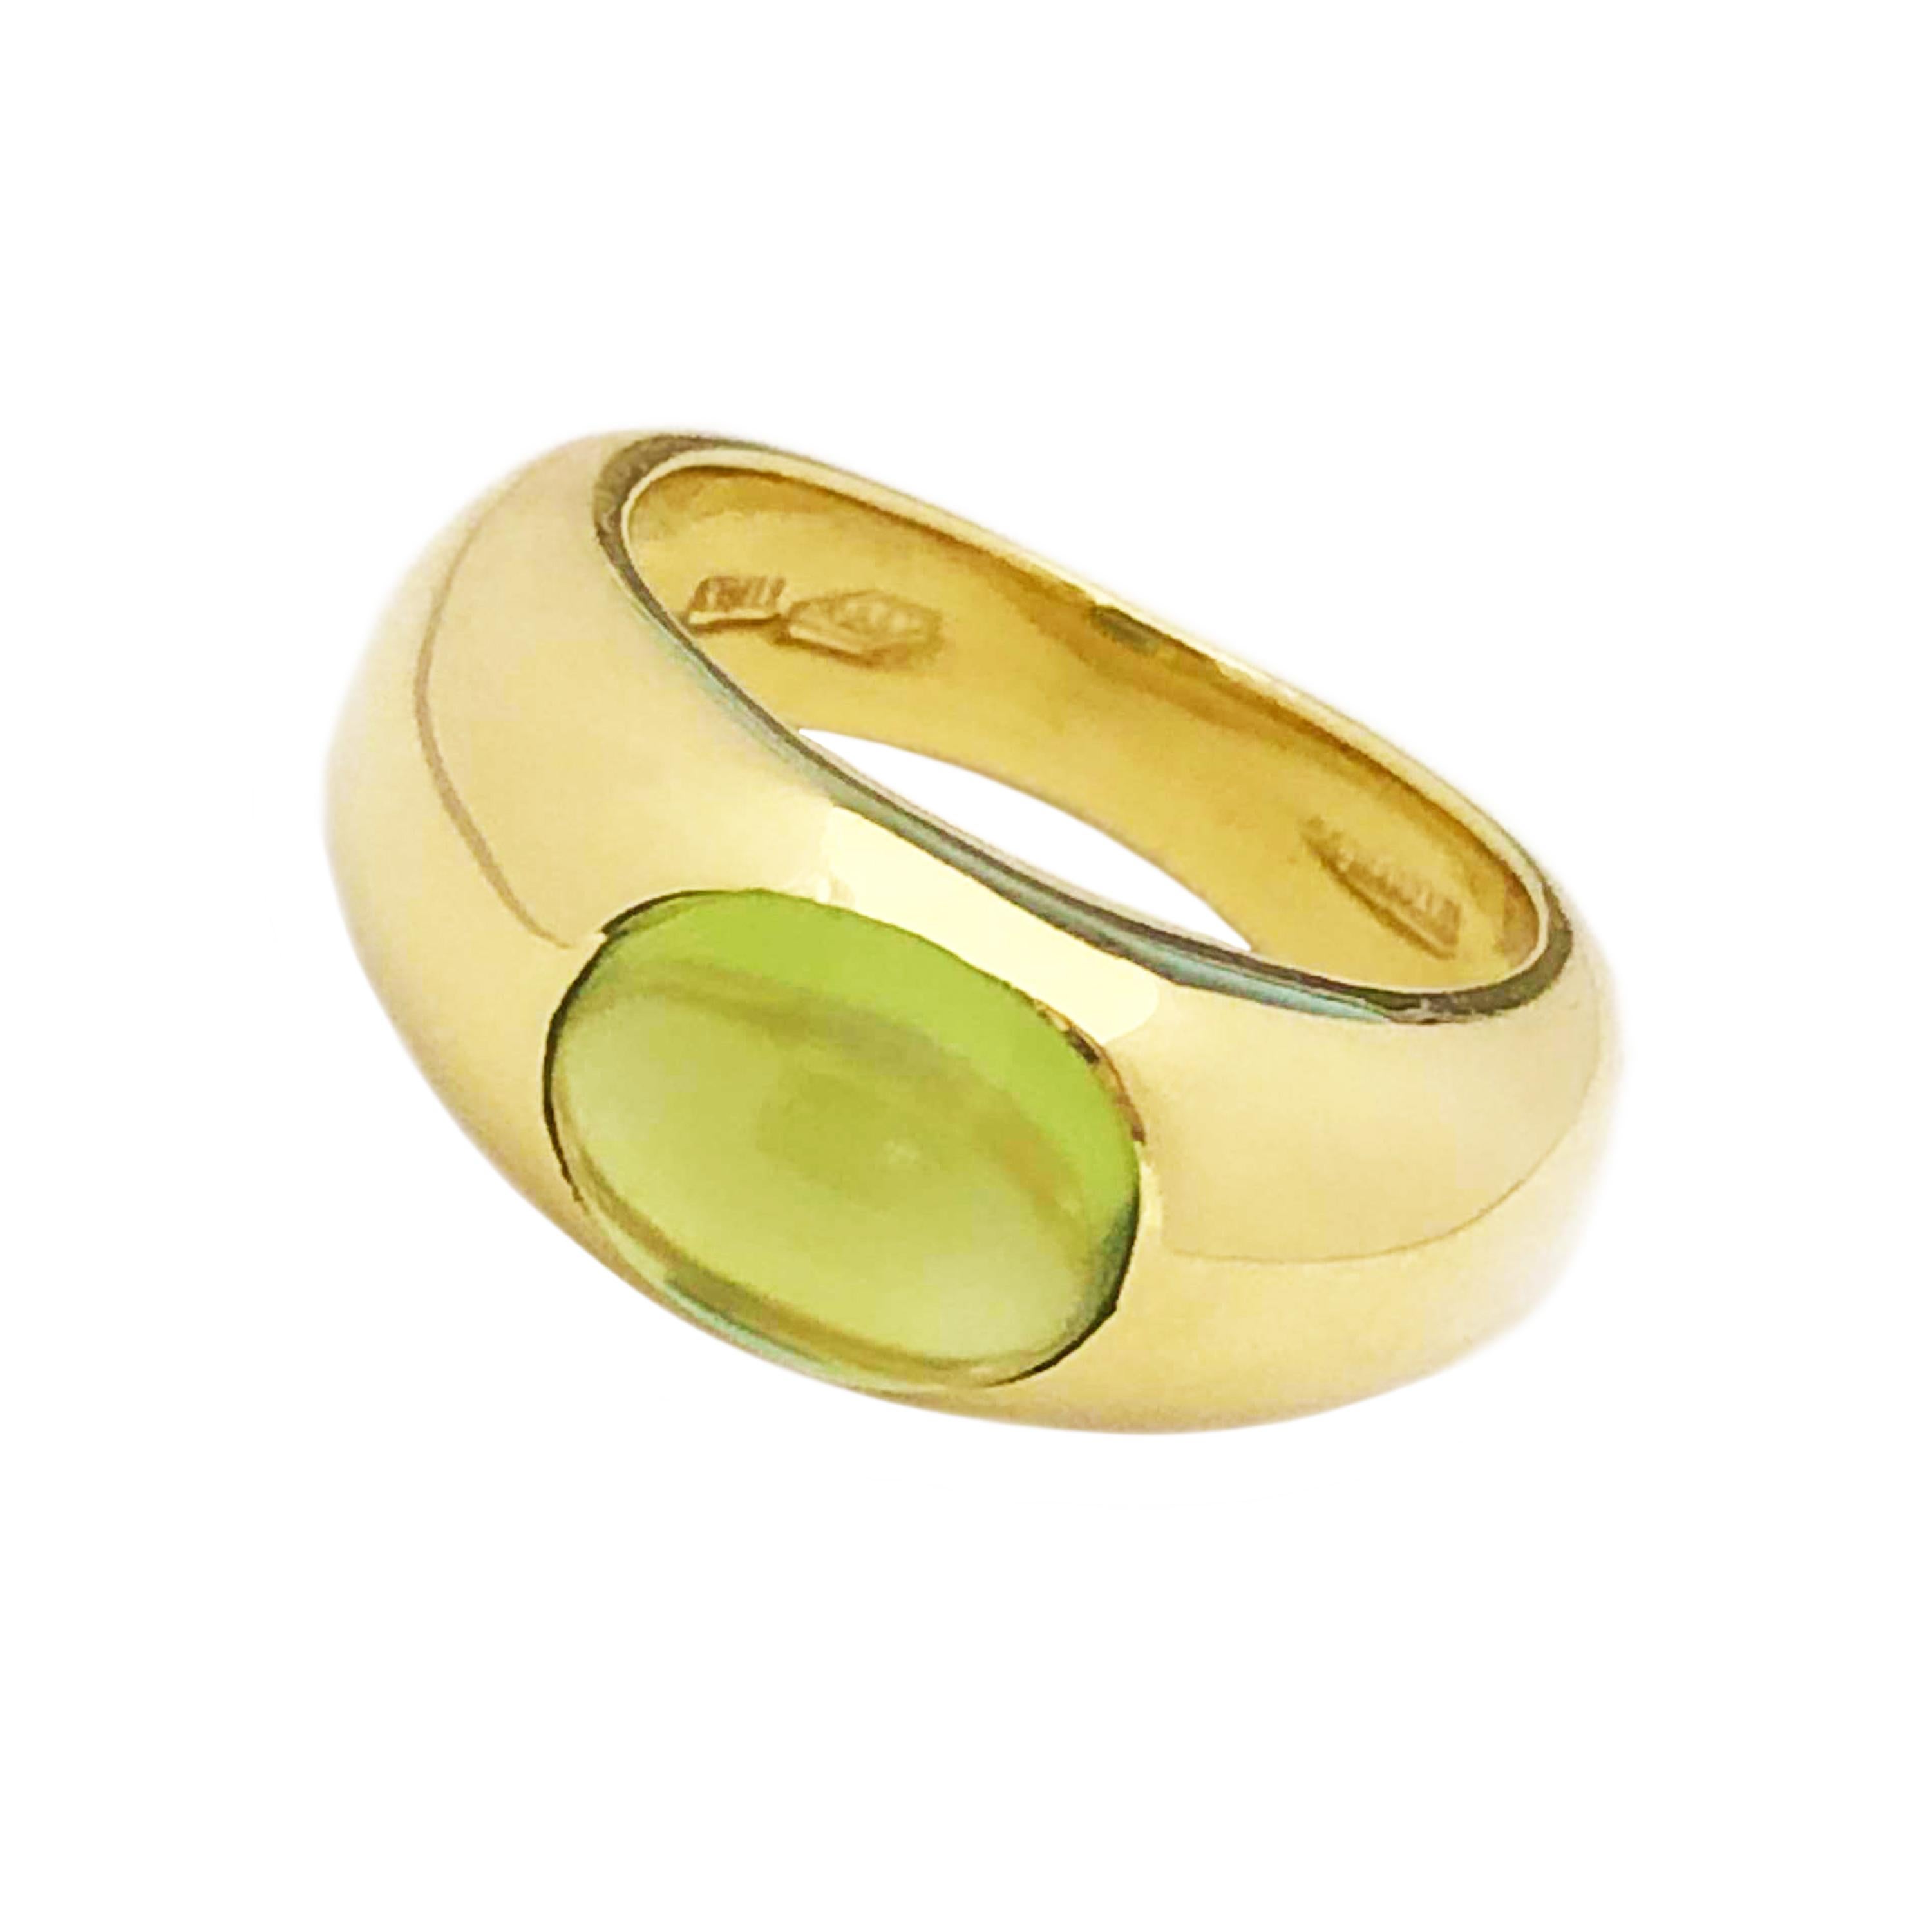 Circa 1970s Tiffany & Company 18K Yellow Gold Ladies Ring, centrally set with a fine color Oval Cabochon Peridot, measuring 8 X 6 MM approximately 2 Carats. Measuring 5/8 inch across the top and 1/4 inch wide. Finger size 4.  